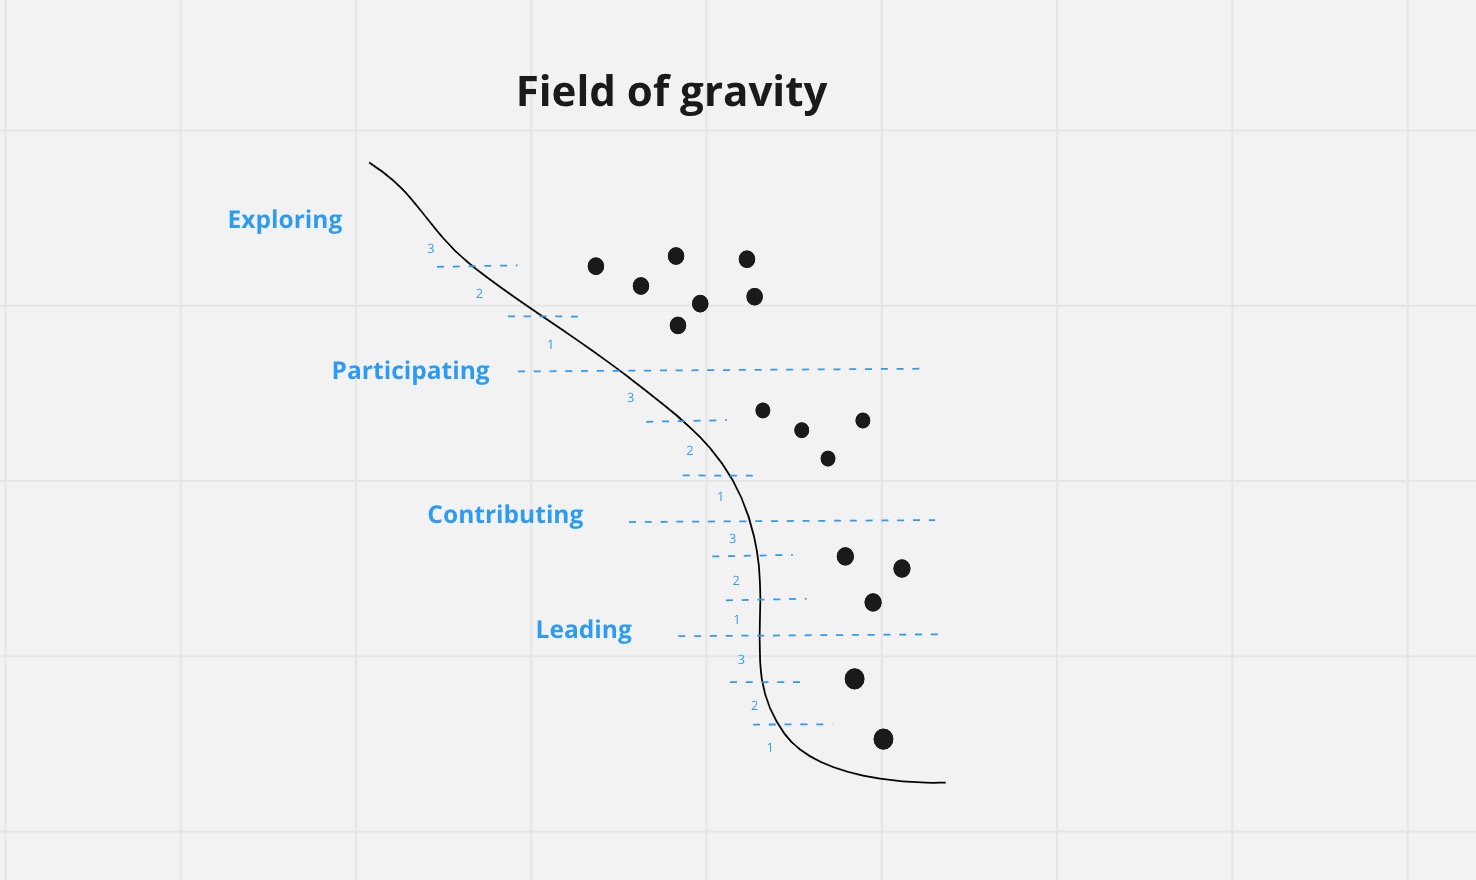 Field of gravity with orbit levels